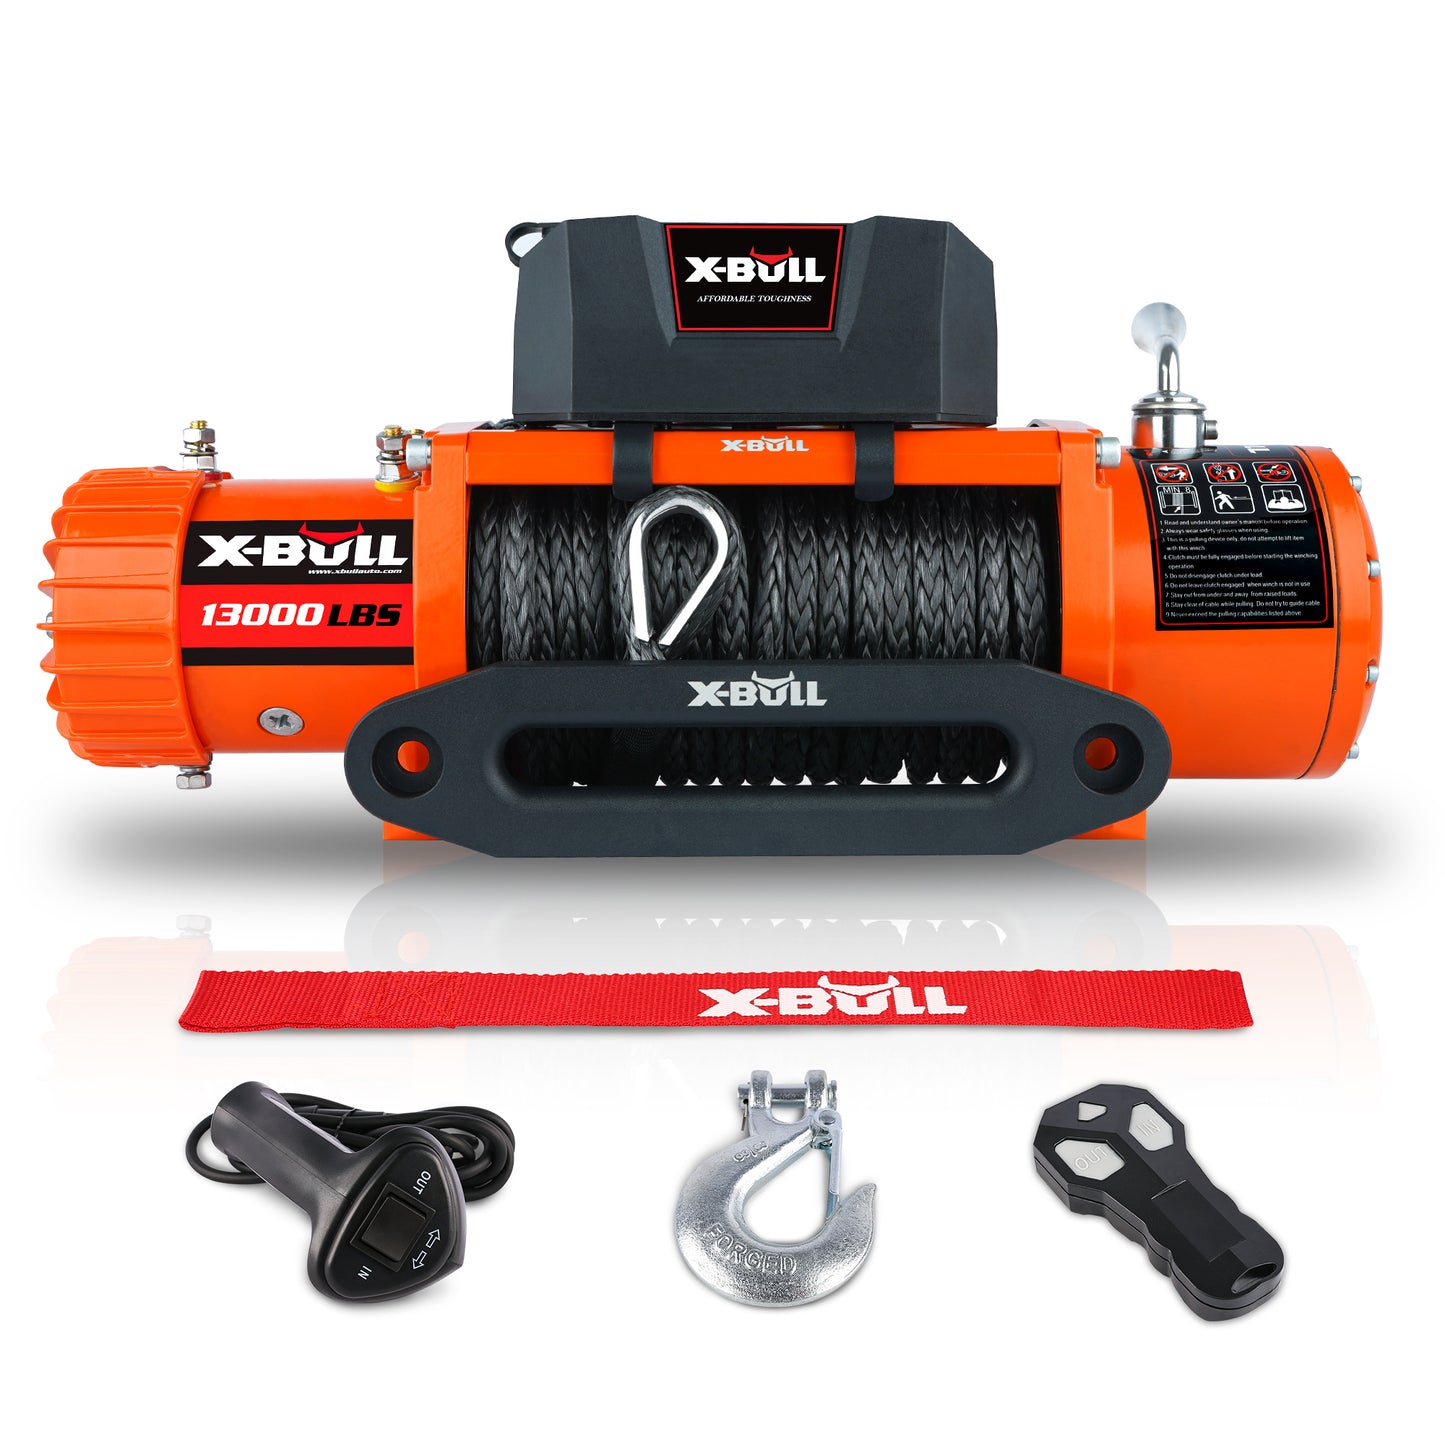 X-BULL Electric Winch 13000 LBS 12V Synthetic Rope Upgraded Version